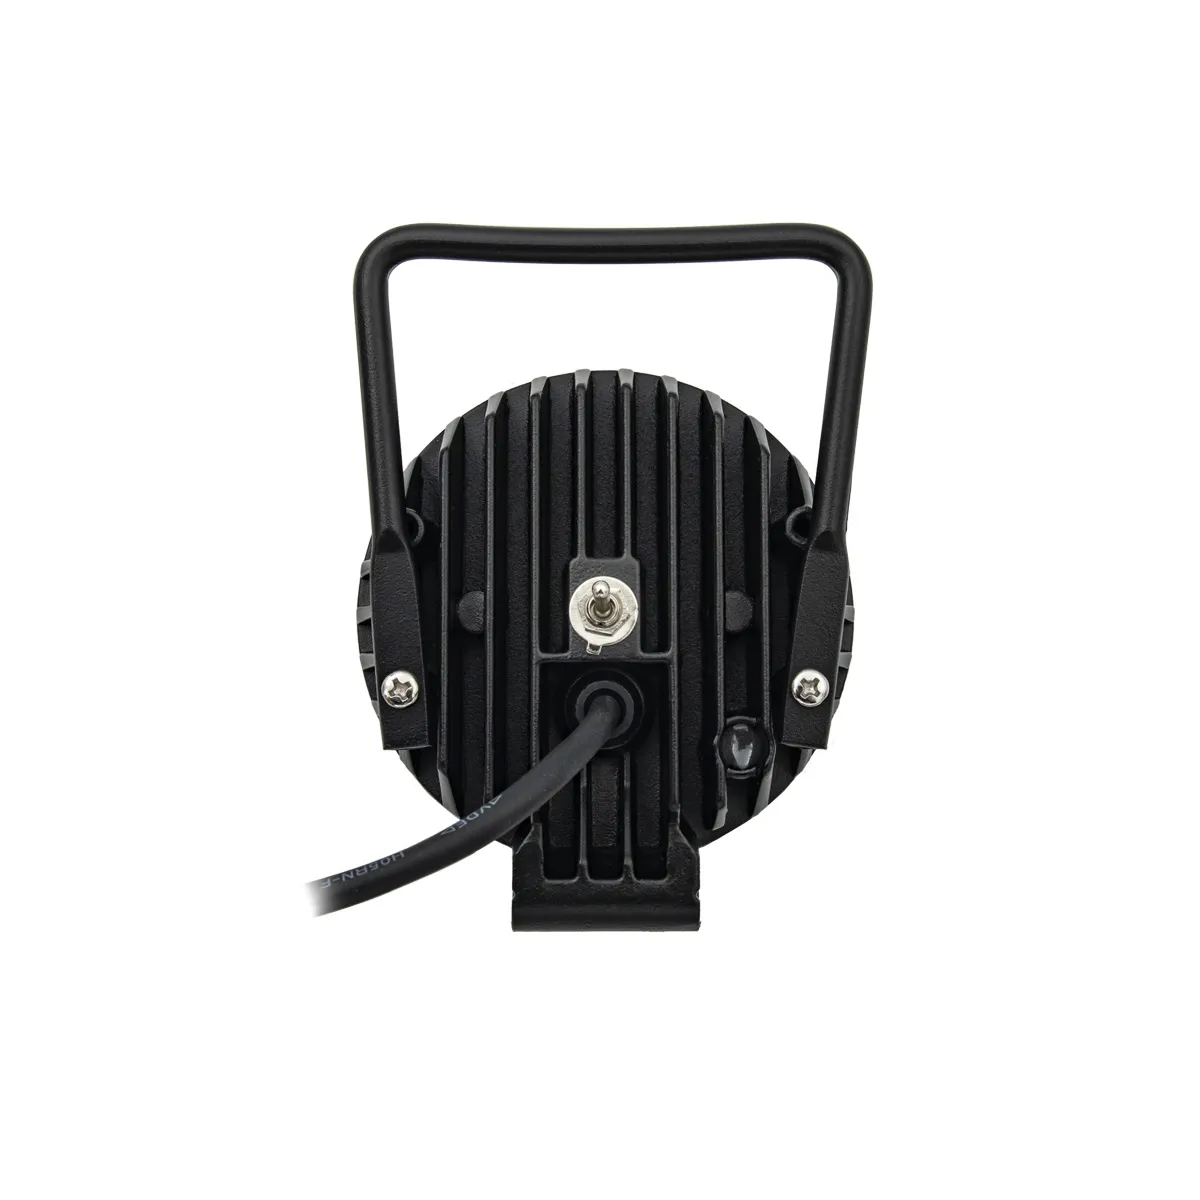 LED work light for heavy duty suppliers